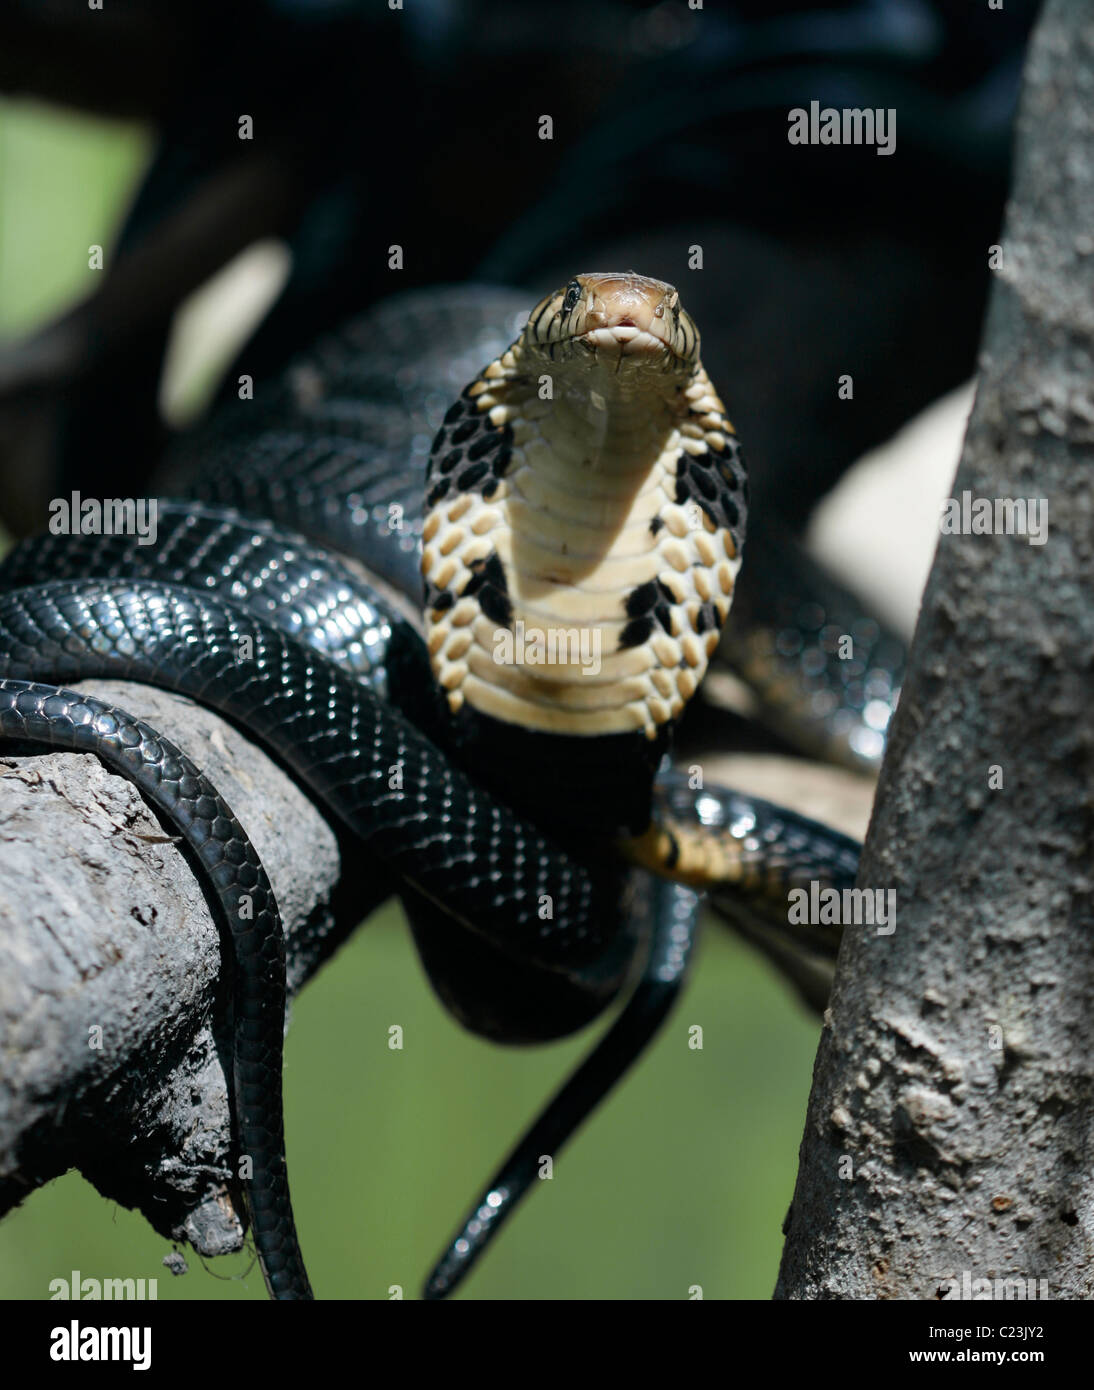 A forest cobra (Naja melanoleuca) in a tree in Uganda, with its hood extended and ready to strike Stock Photo